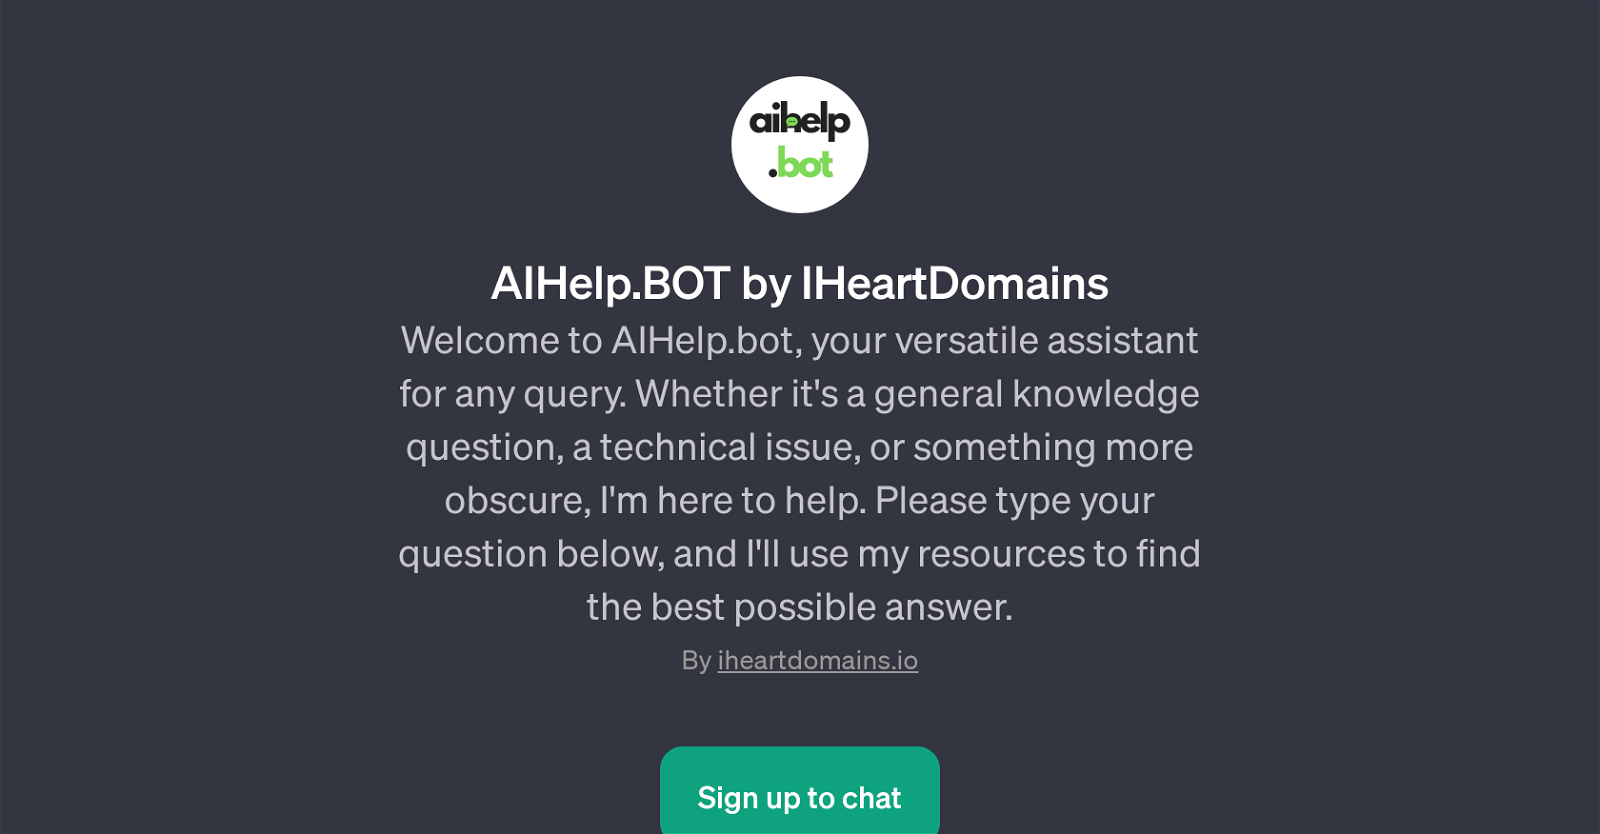 AIHelp.BOT by IHeartDomains website